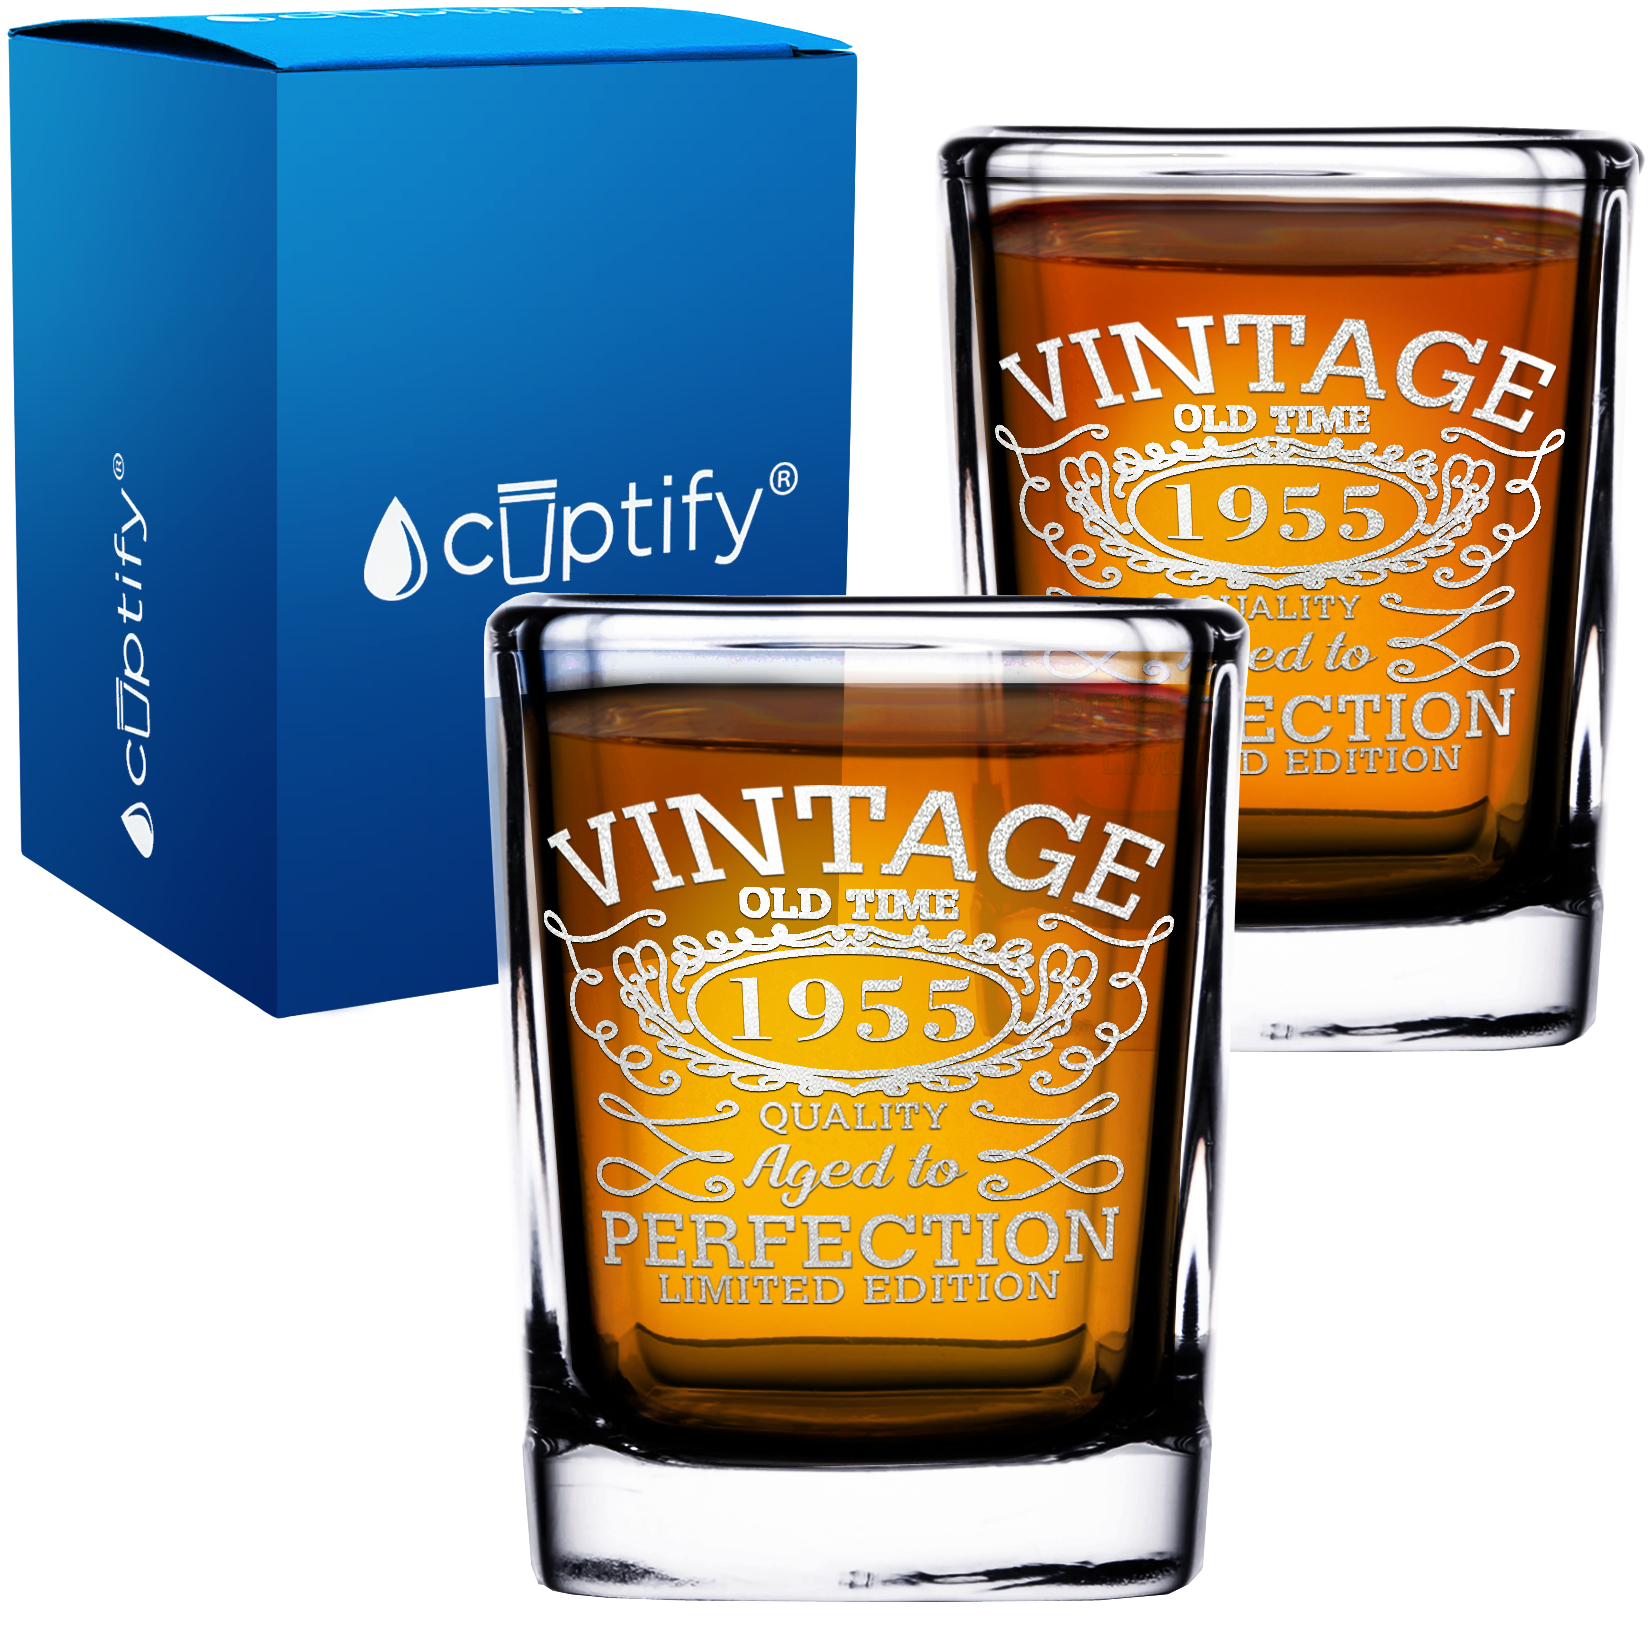 67th Birthday Vintage 67 Years Old Time 1955 Quality 2oz Square Shot Glasses - Set of 2